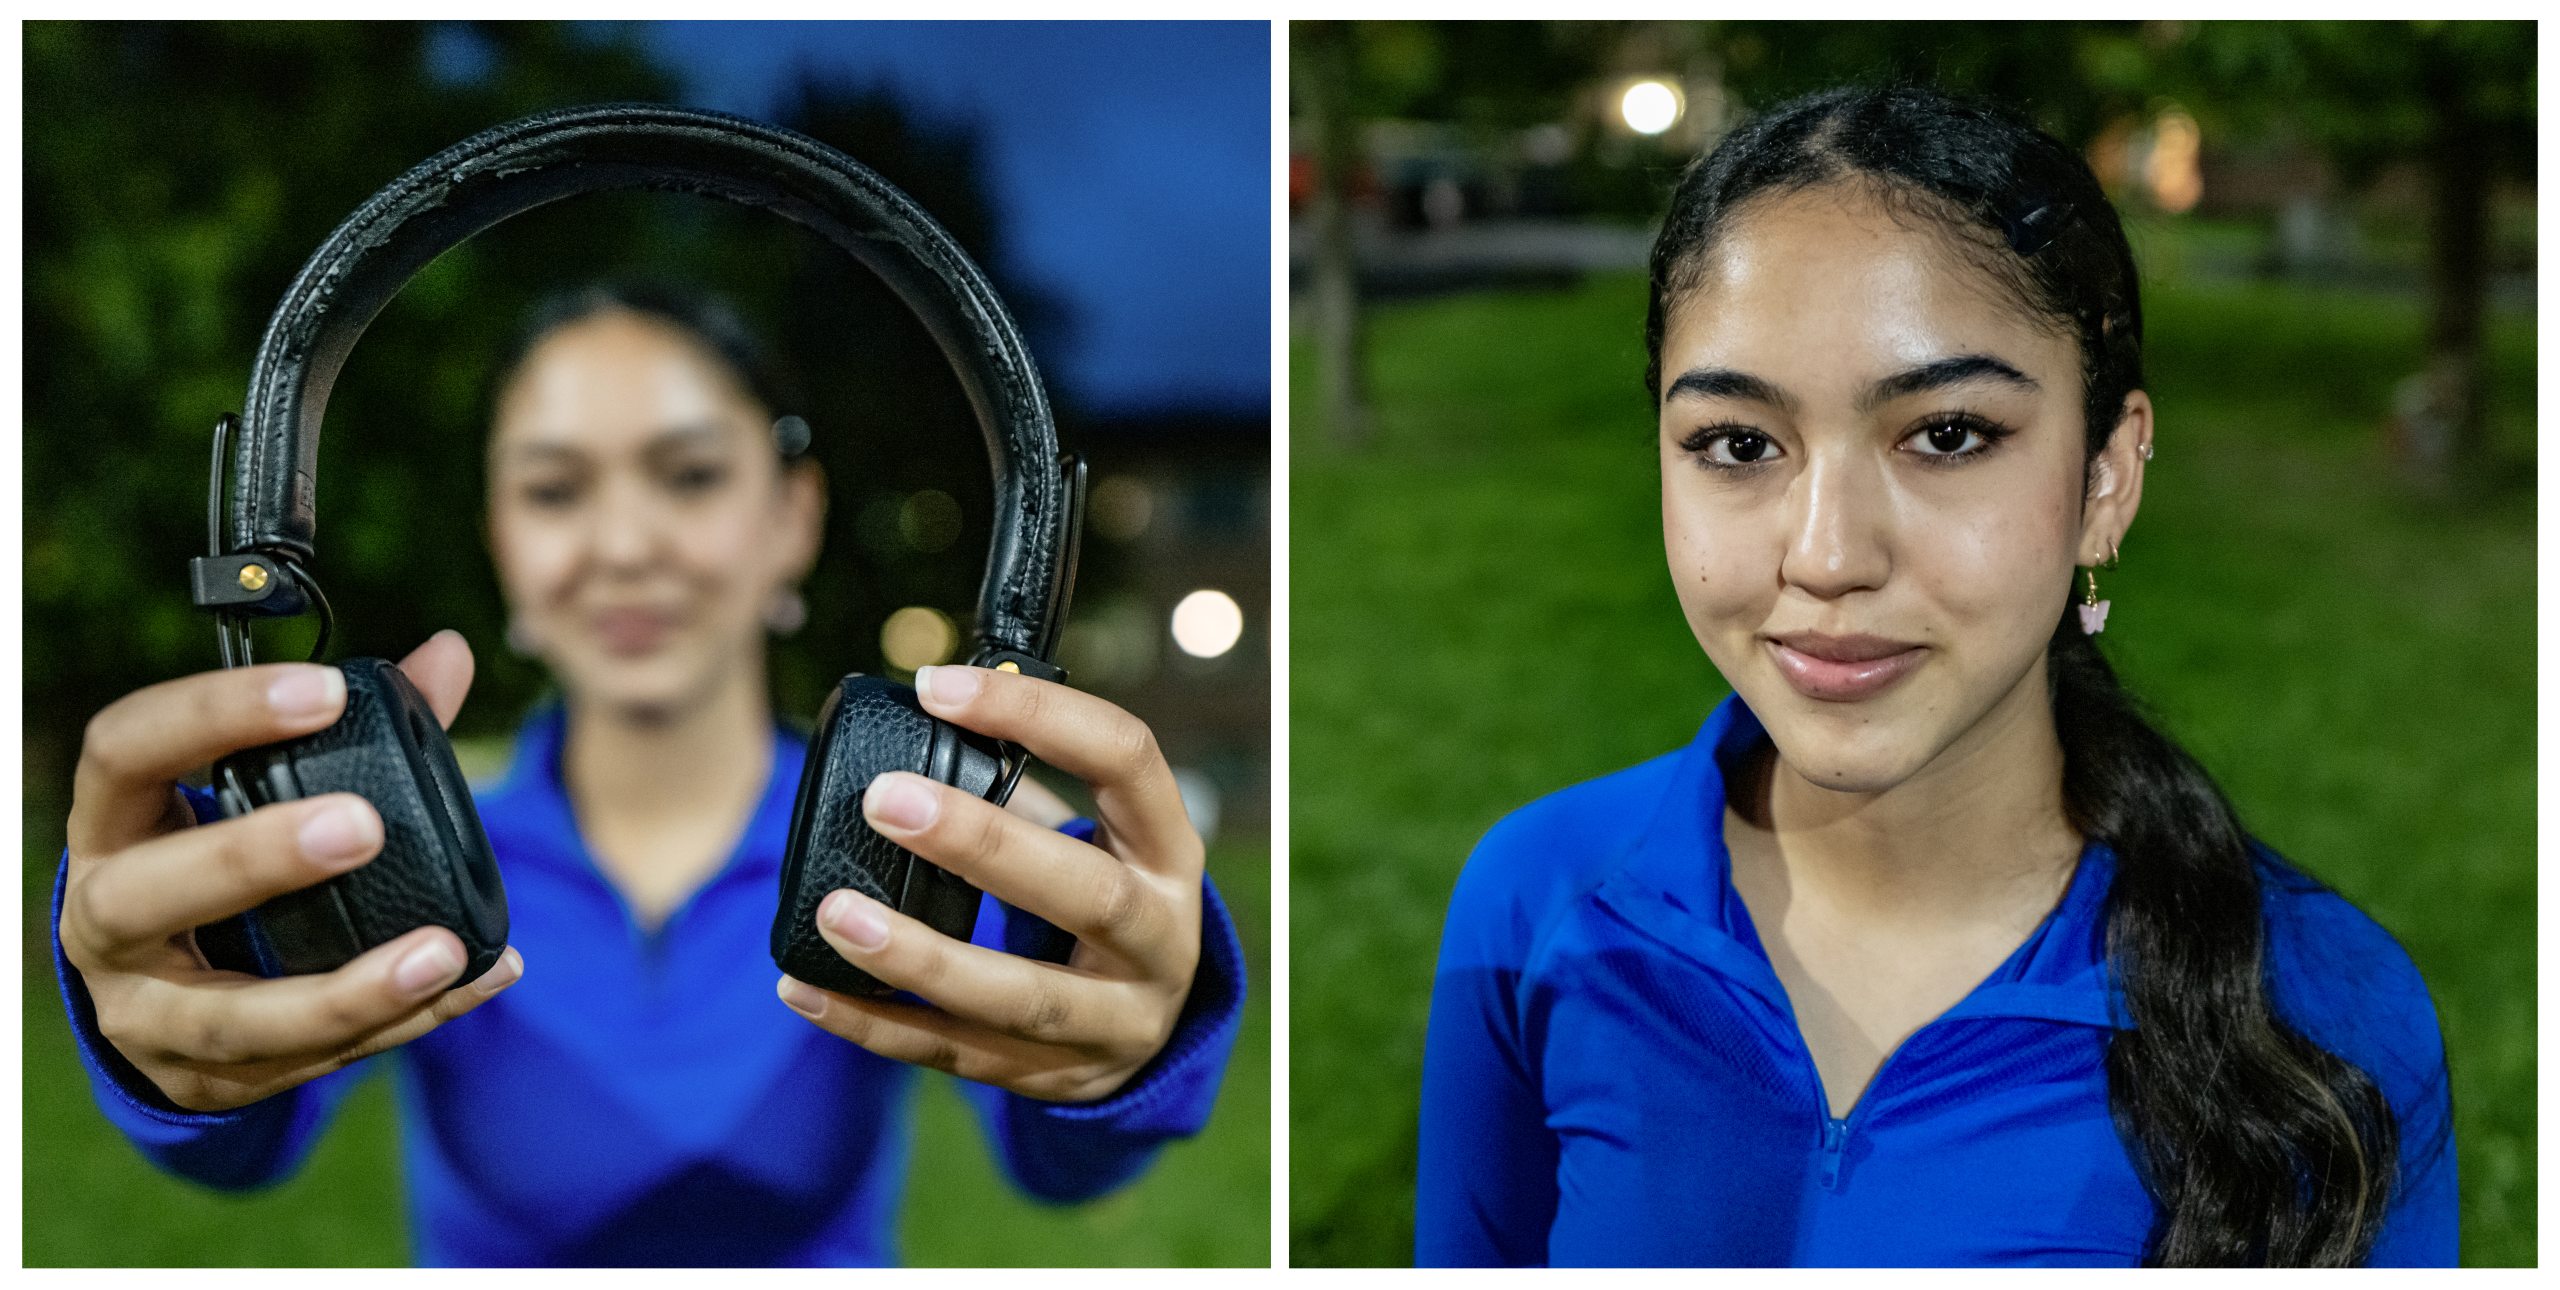 A two-photo collage of a student named Gabrielle Poole. On the left is picture of hear holding a pair of headphones, and on the right is a portrait of Gabrielle.